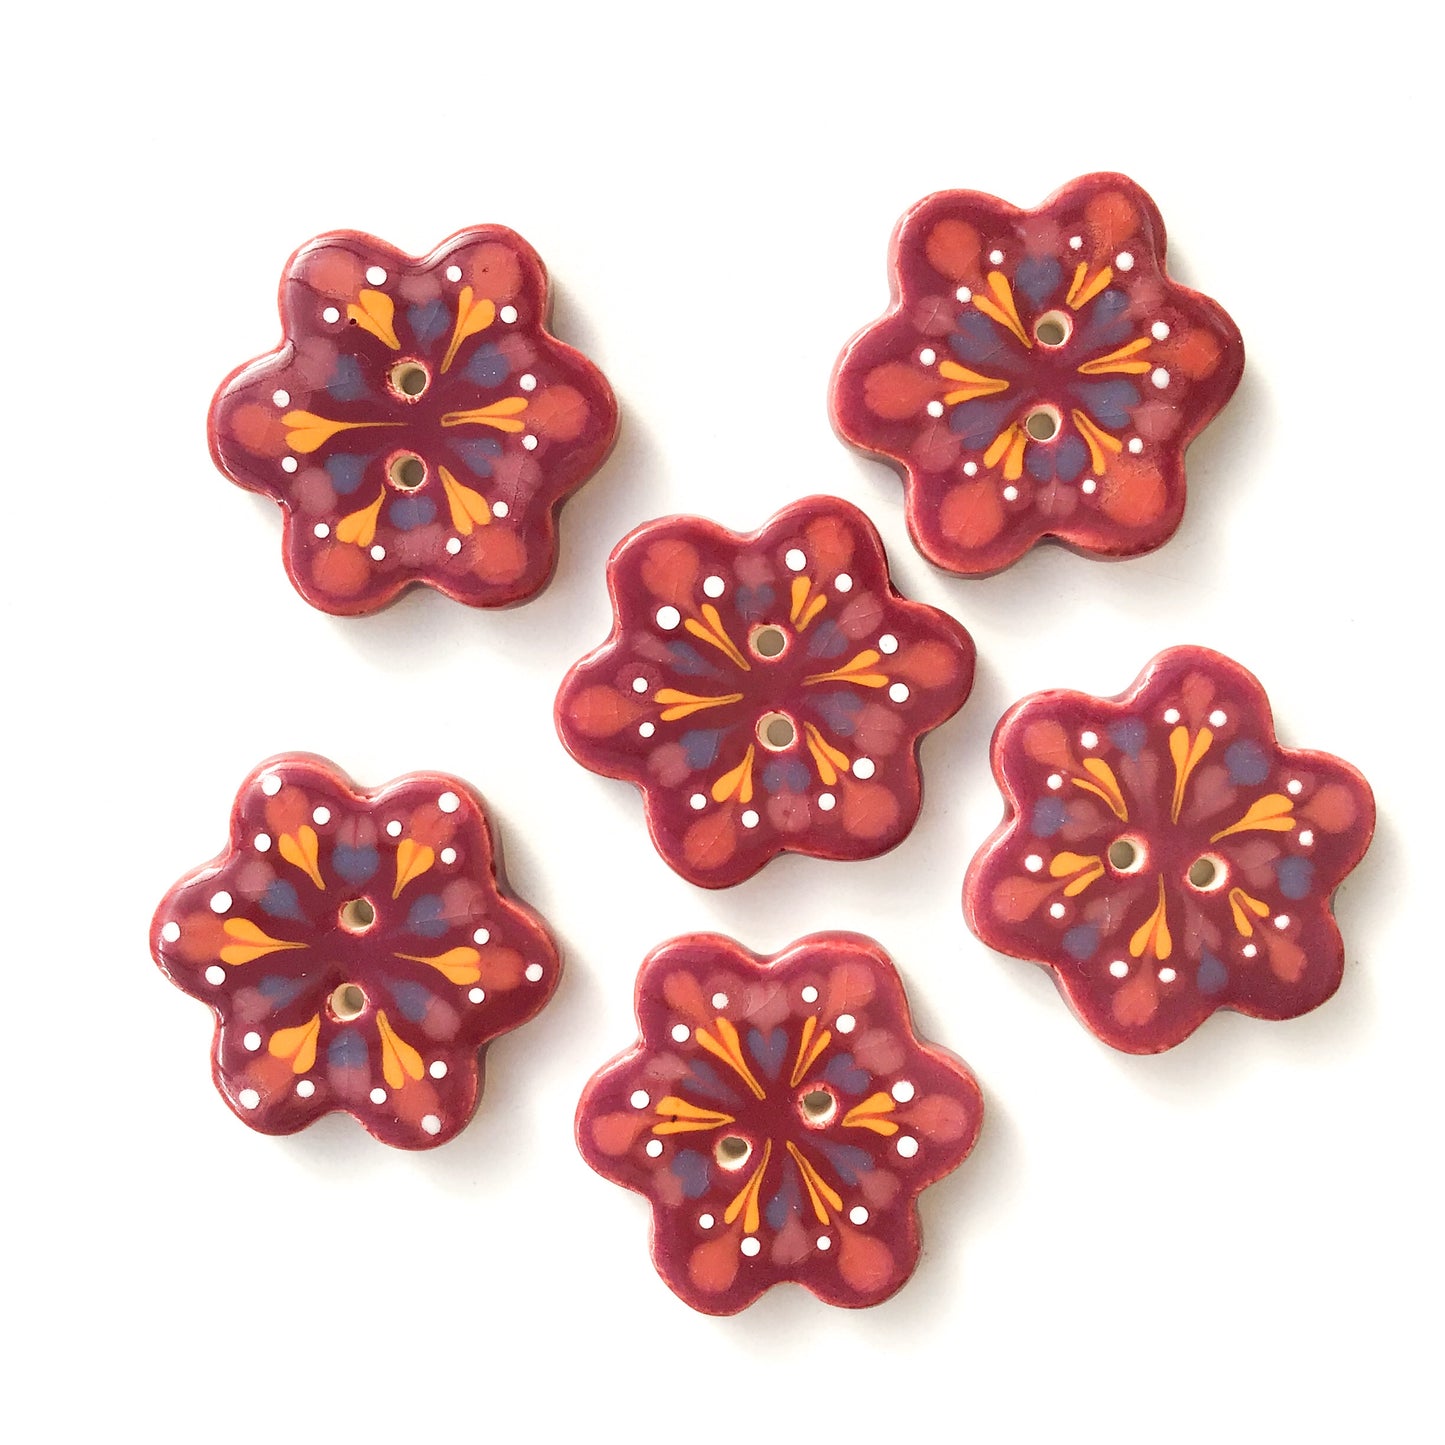 Wine Colored - Flower Shaped Ceramic Buttons - Decorative Clay Buttons - 1 1/4"